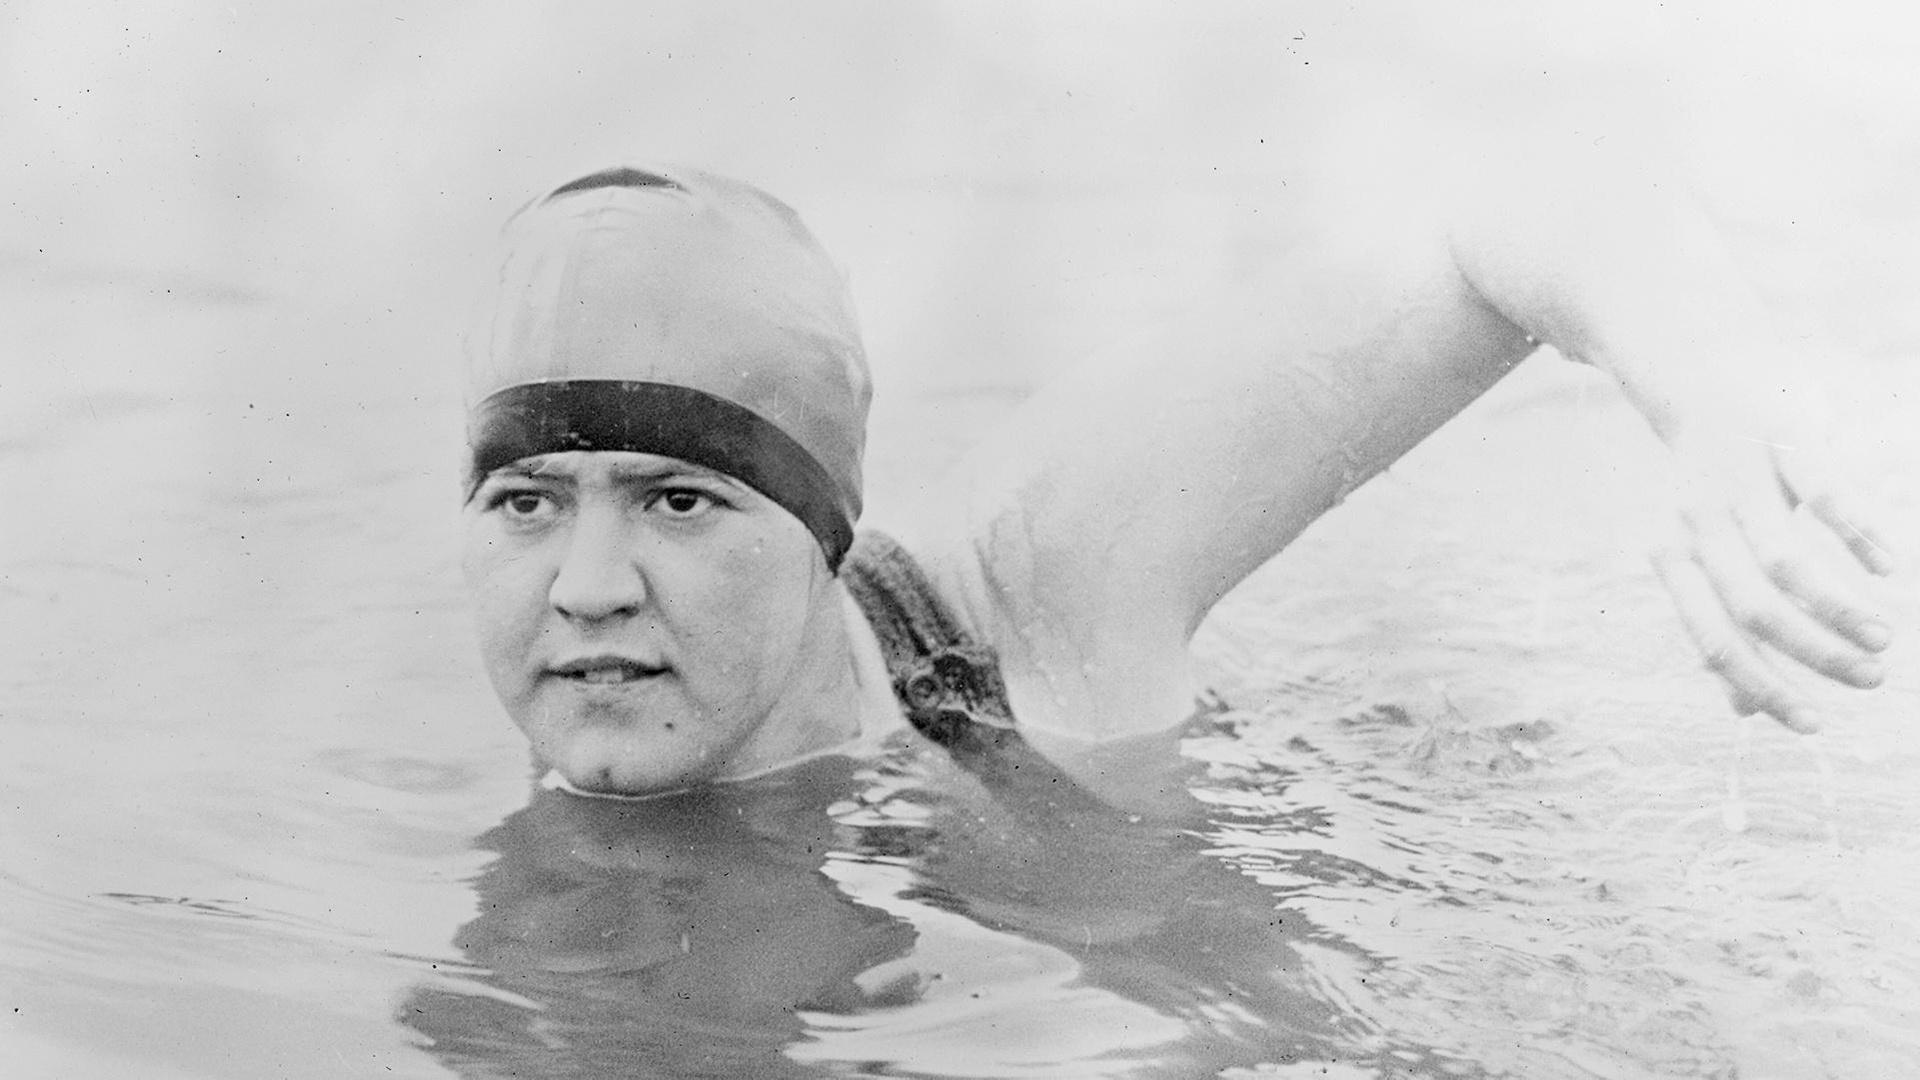 American Masters She was the First Woman to Swim Across the English Channel pic